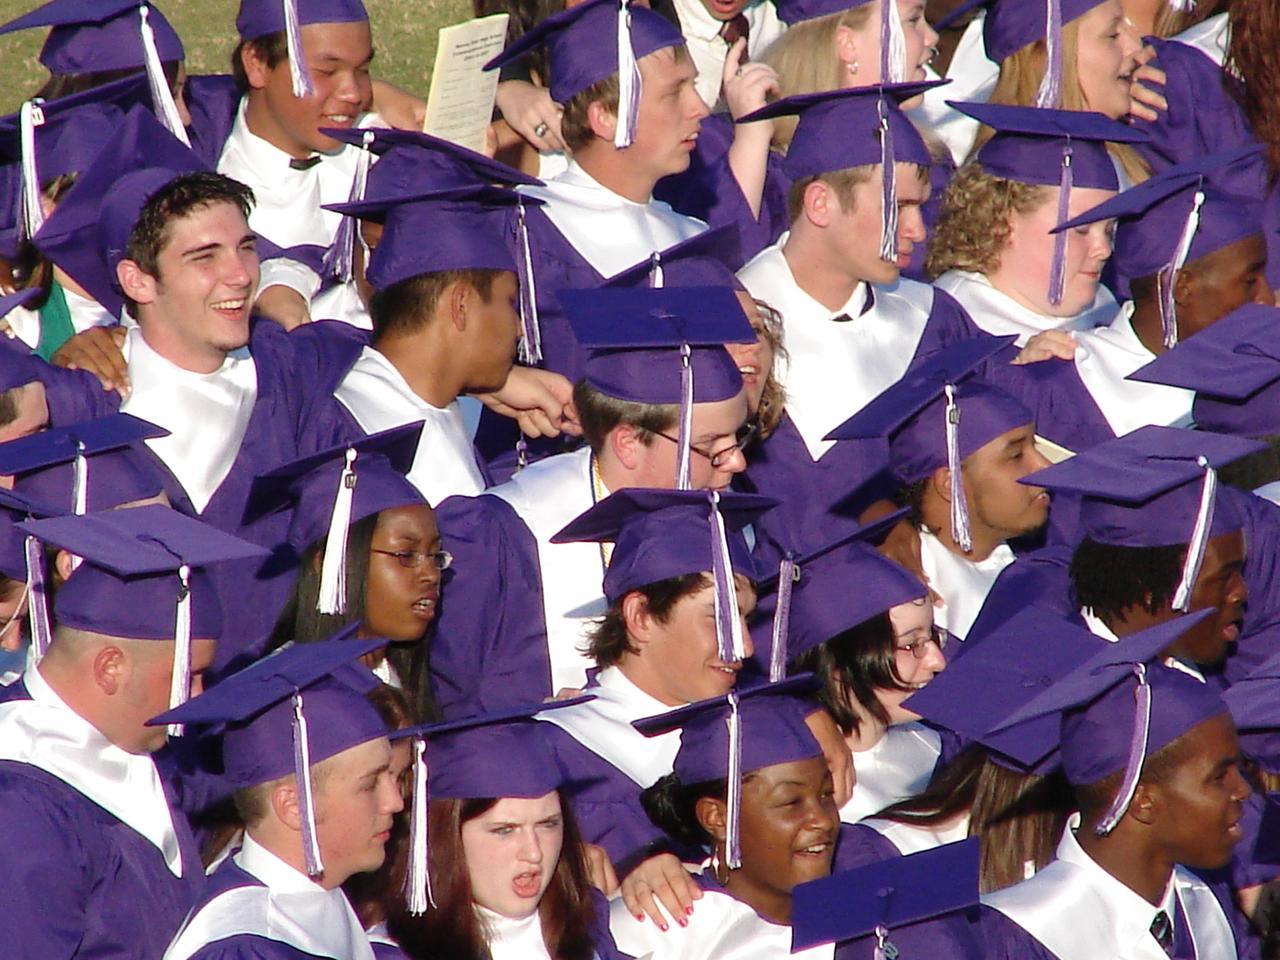 8 Lessons Every College Graduate Needs to Learn About the “Real World”